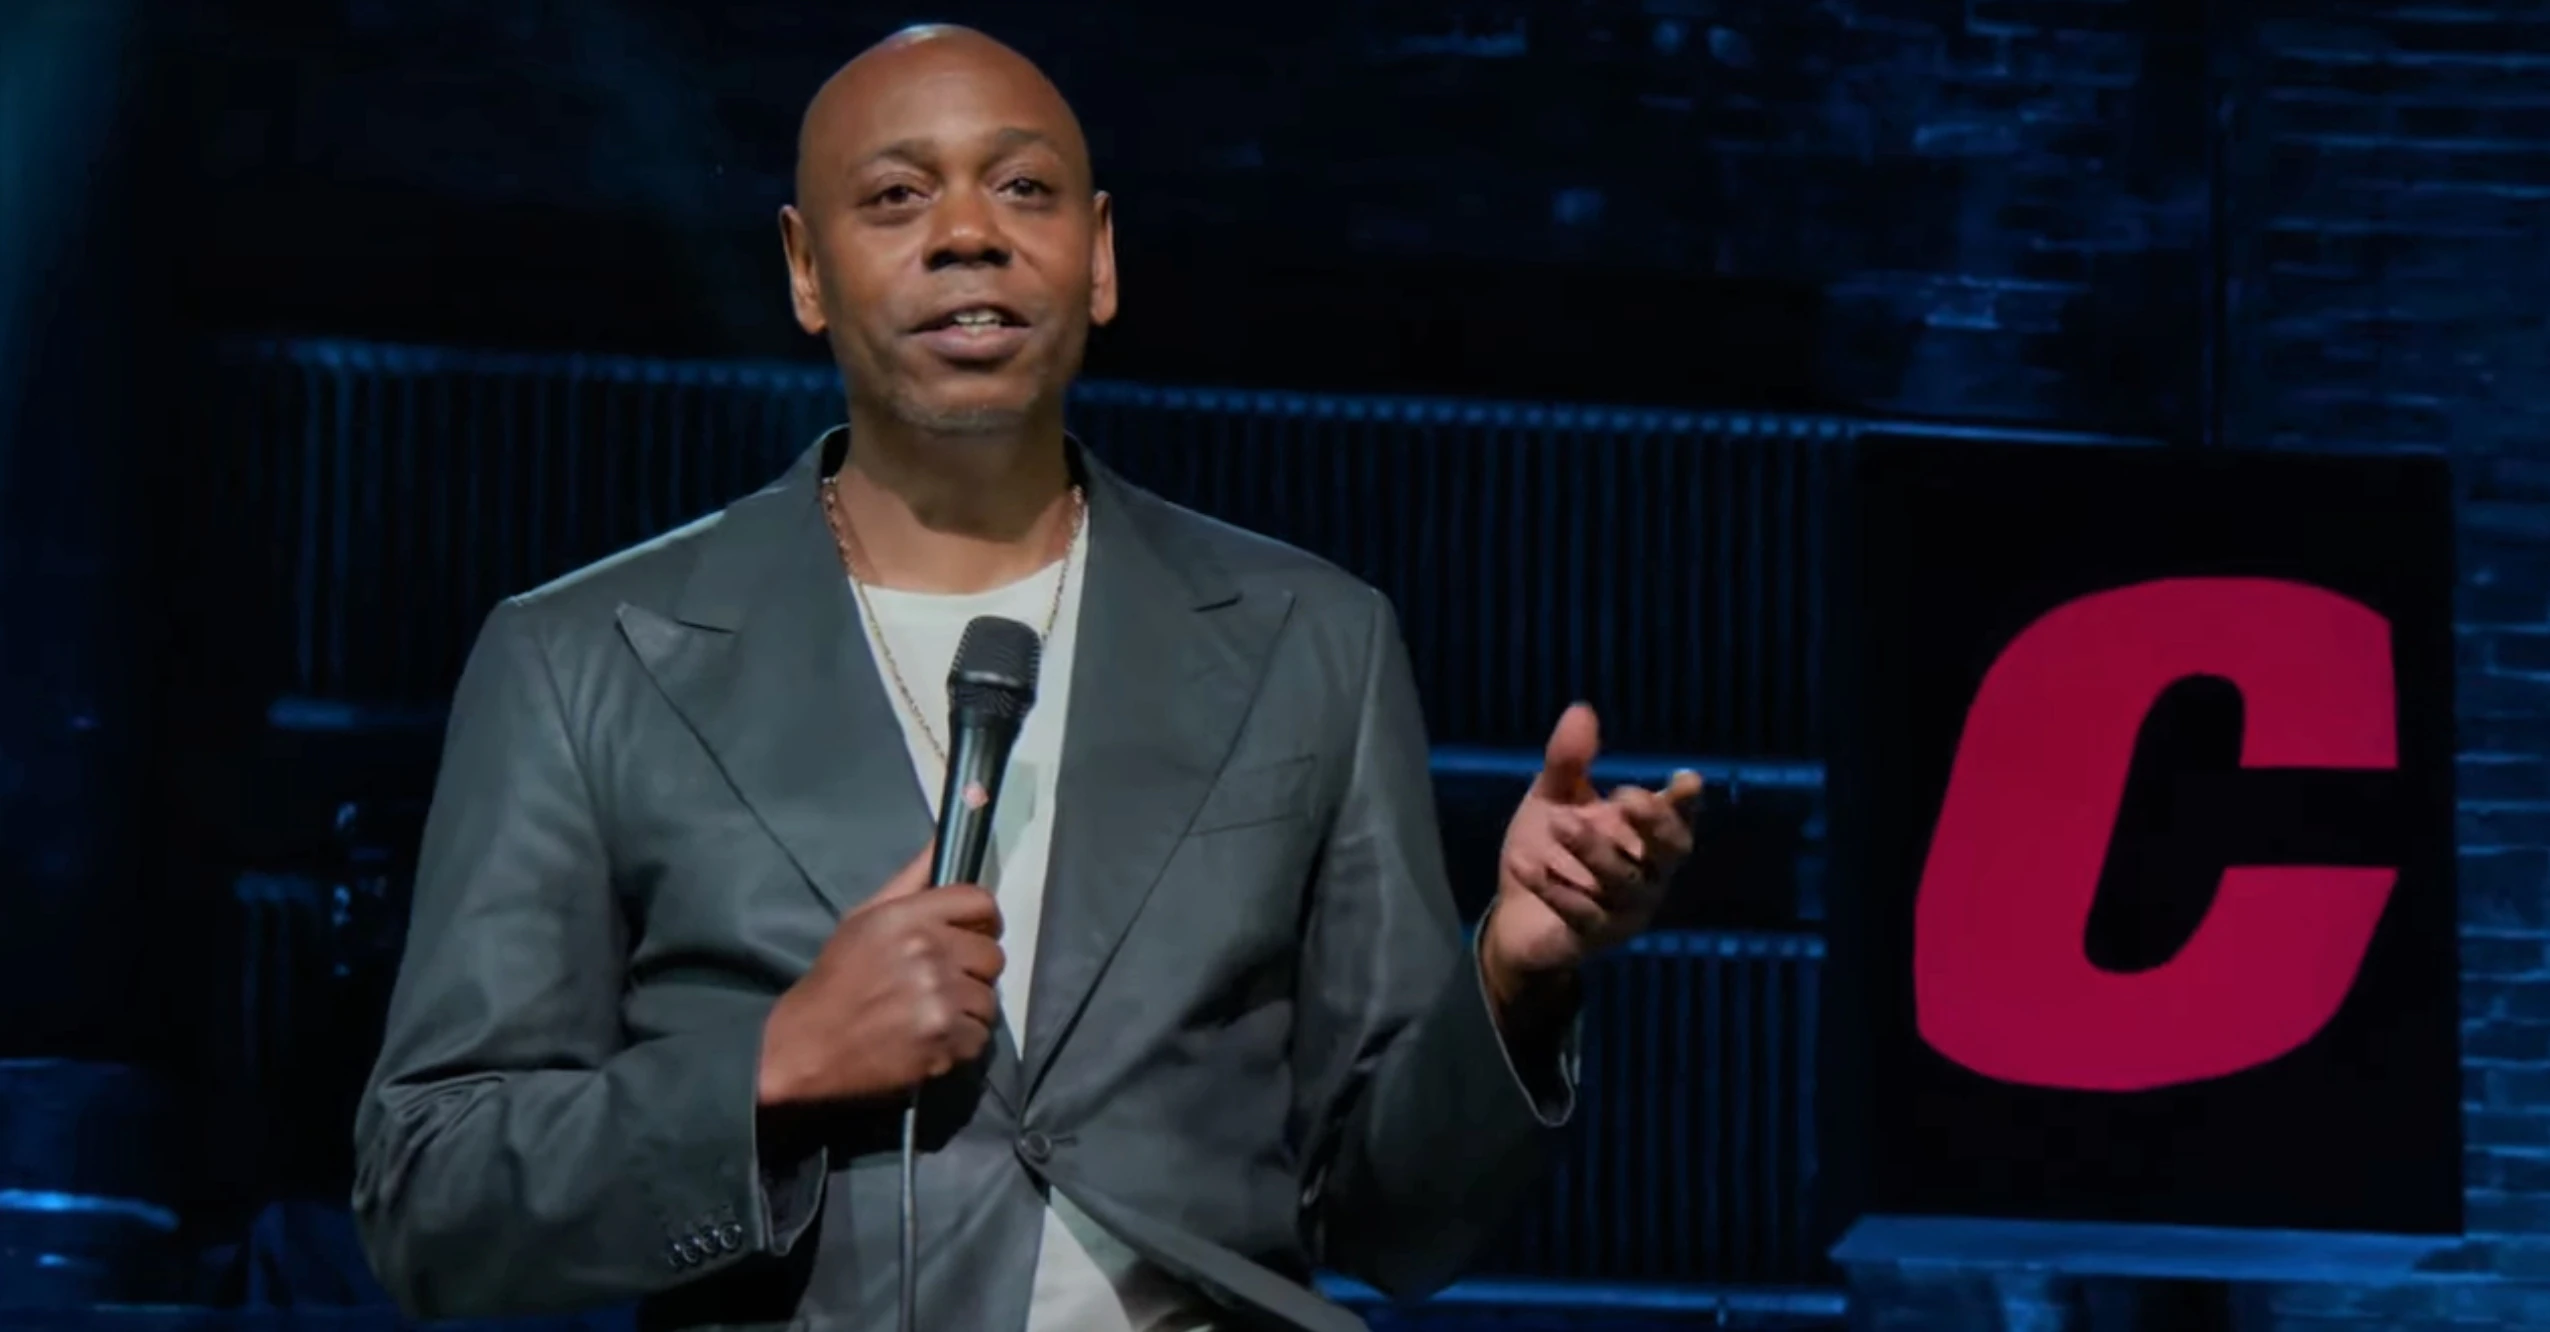 Why Some People Want Netflix to Remove Dave Chappelle’s New Comedy Special ‘The Closer’